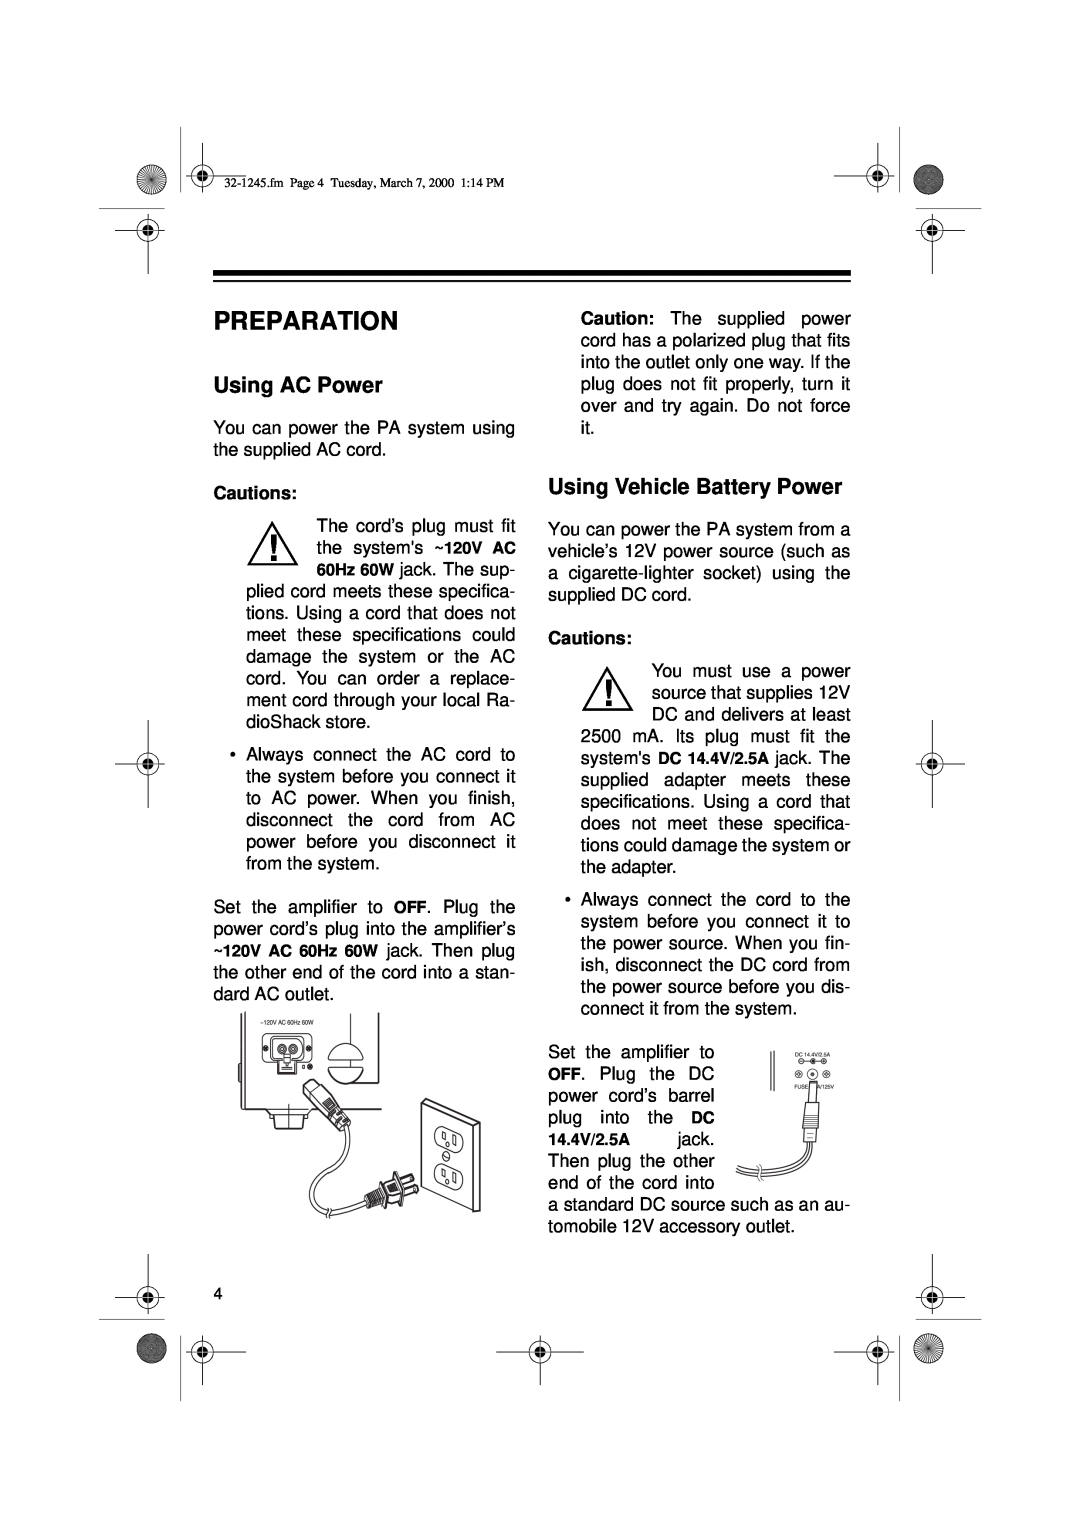 Ricoh 32-1245 owner manual Preparation, Using AC Power, Using Vehicle Battery Power 